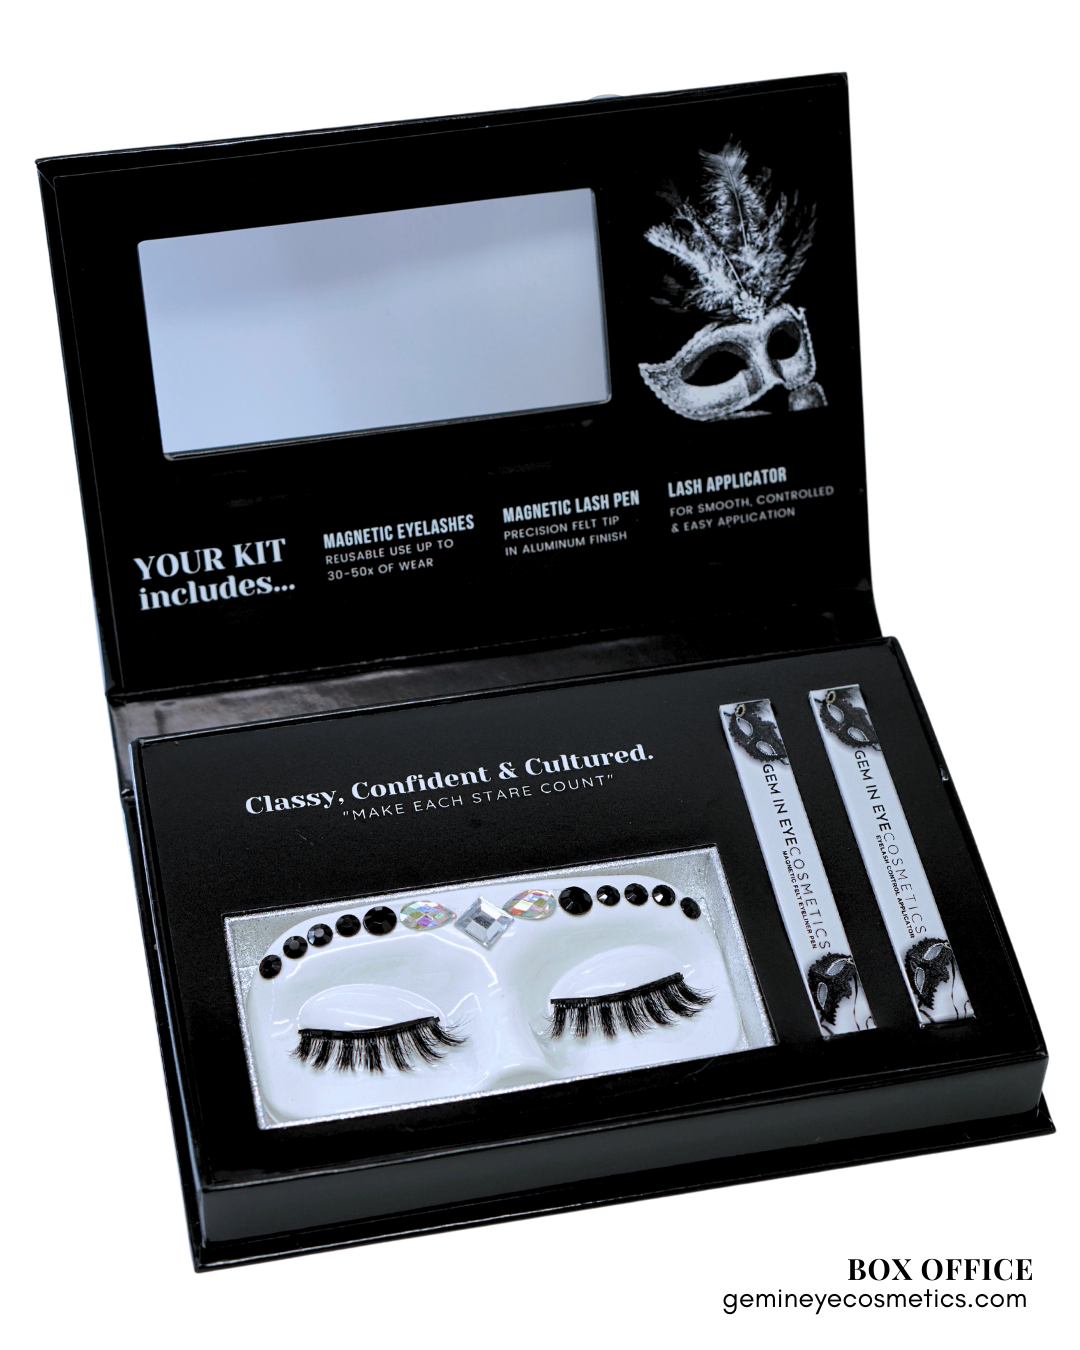 GEM IN EYE Cosmetics Lash &amp; Flash™ Magnetic Eyelashes kit has a pair of classy magnetic eyelashes in a face tray adorned with gems.